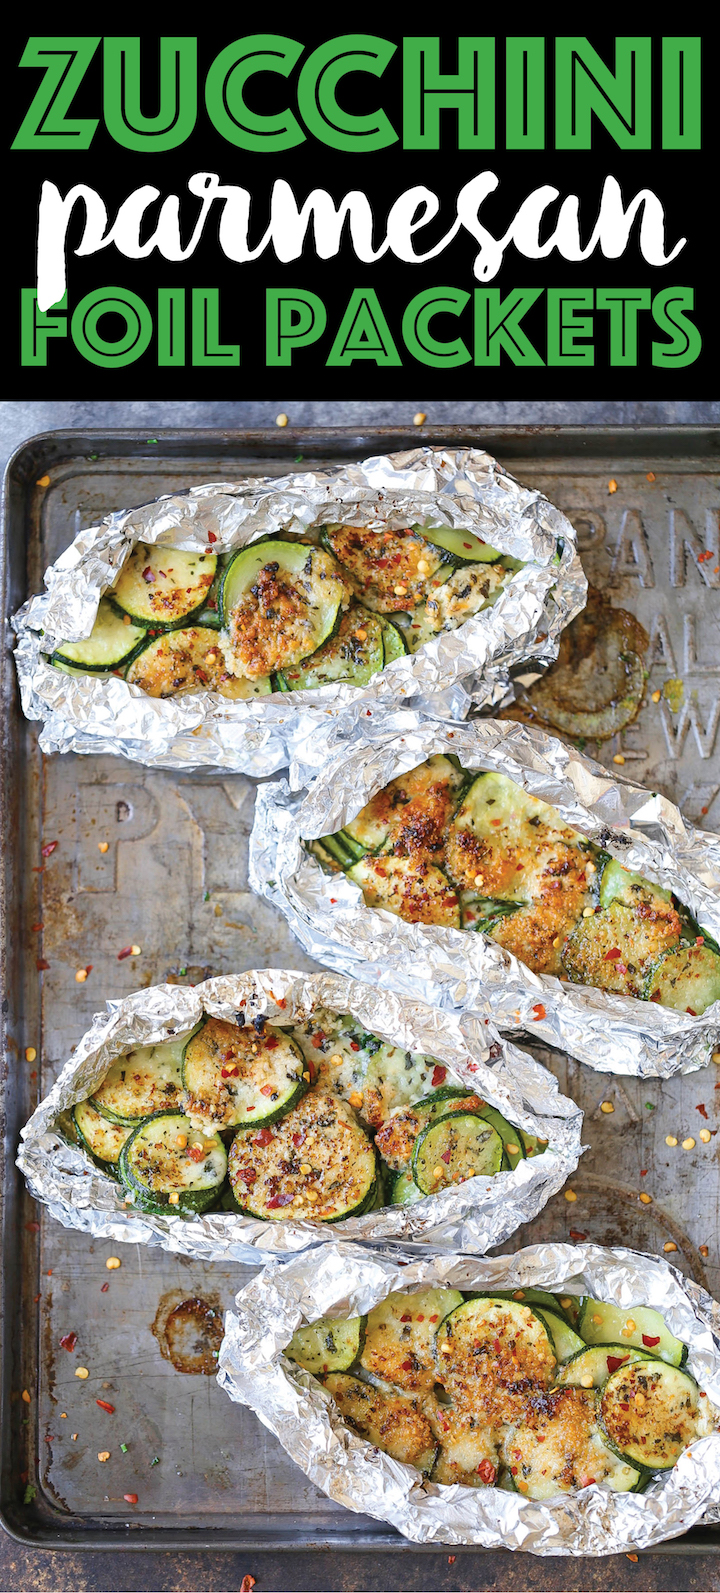 Zucchini Parmesan Foil Packets - Minimum effort, zero clean-up and easy serving! These can also be grilled or baked so you can have it anytime, anywhere!